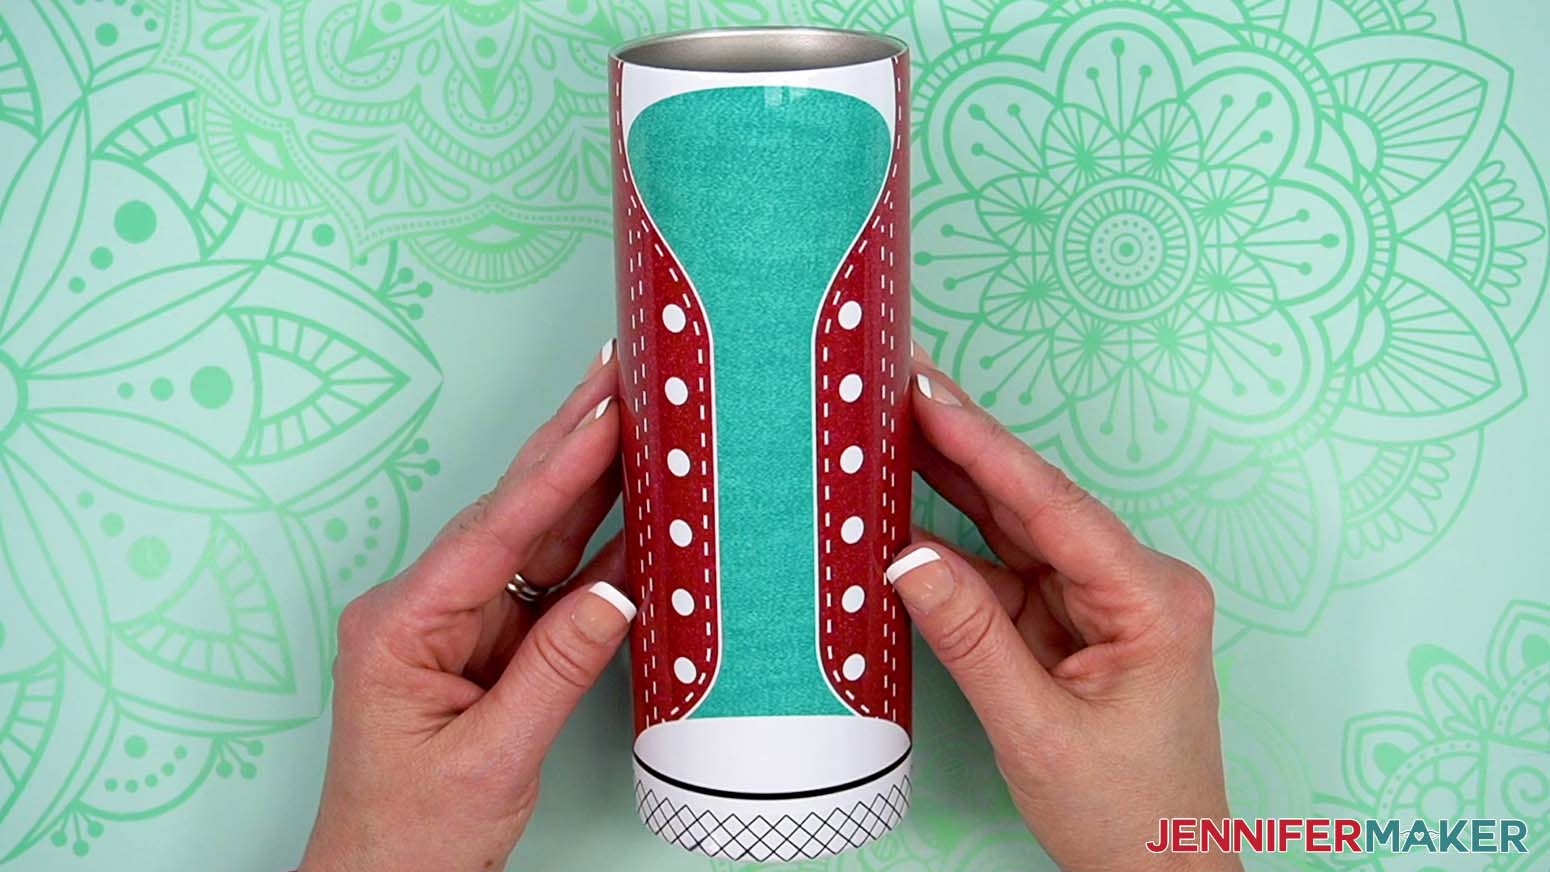 The tumbler is sublimated and ready to embellish with the shoelace.